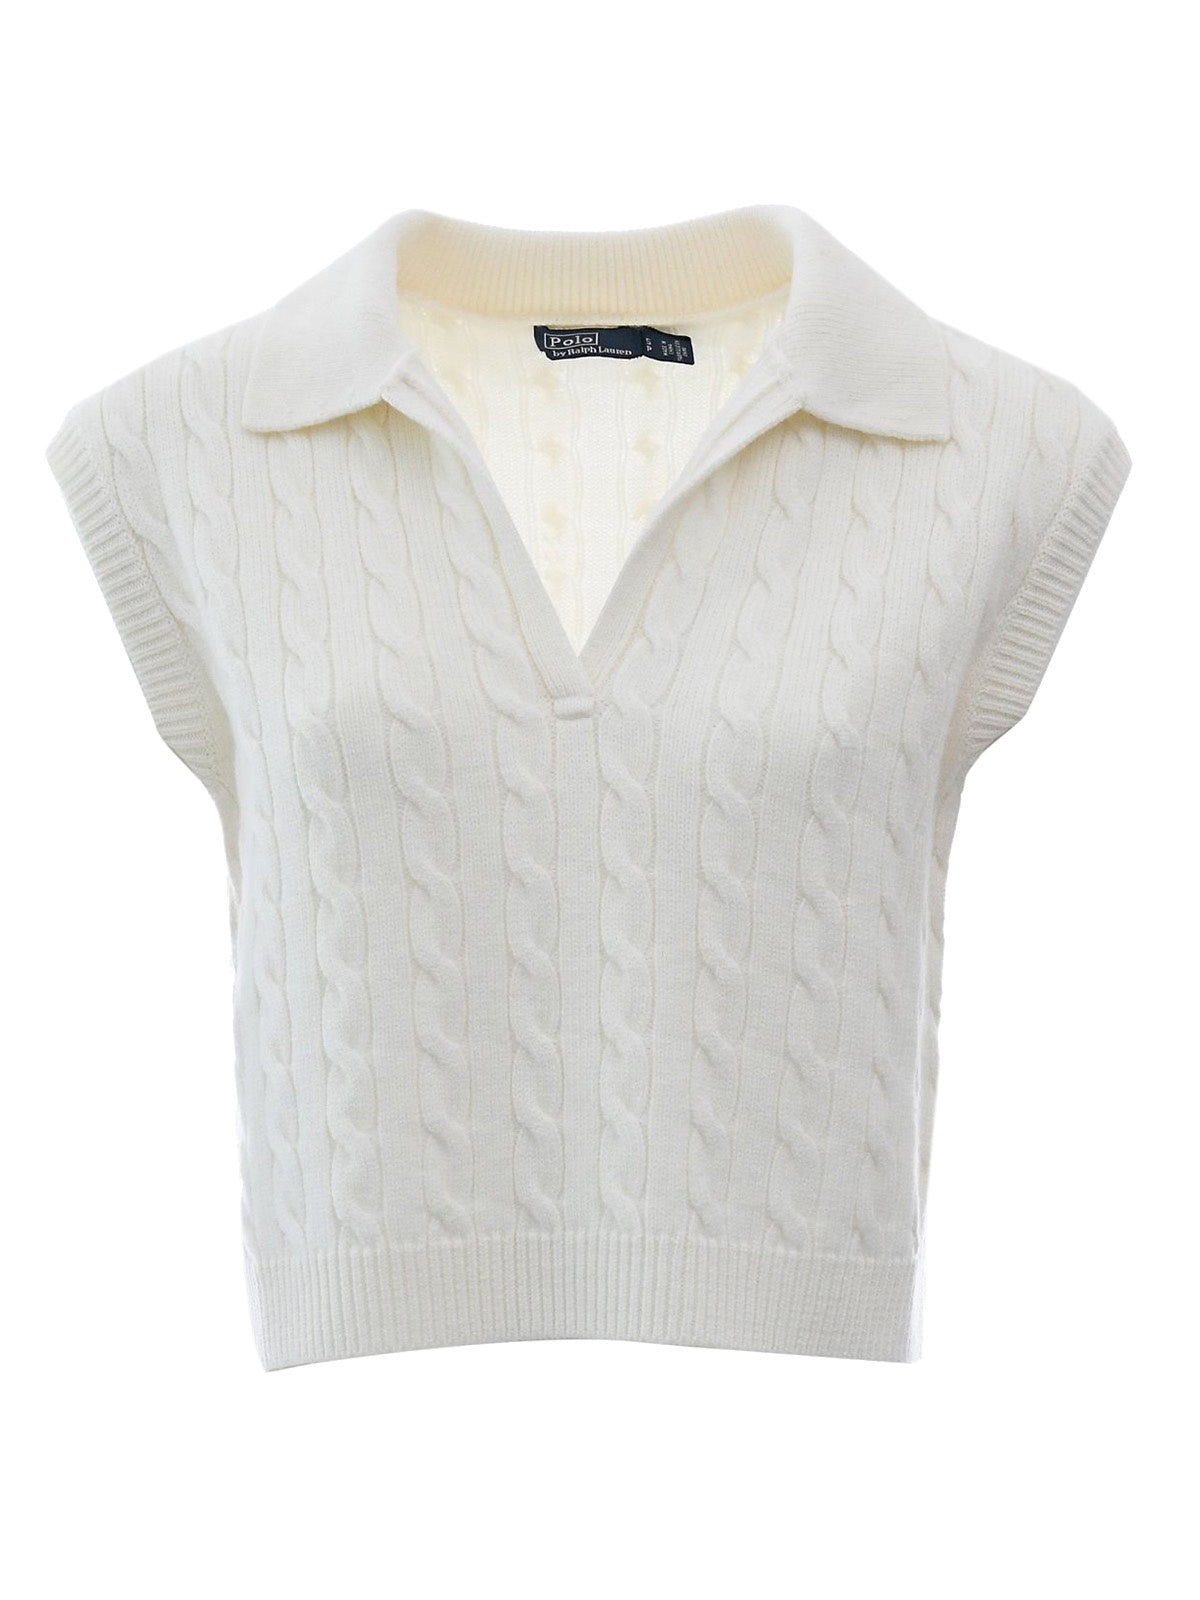 Maglioni Donna Ralph Lauren - Sleeveless Cable-Knit Pullover - Avorio